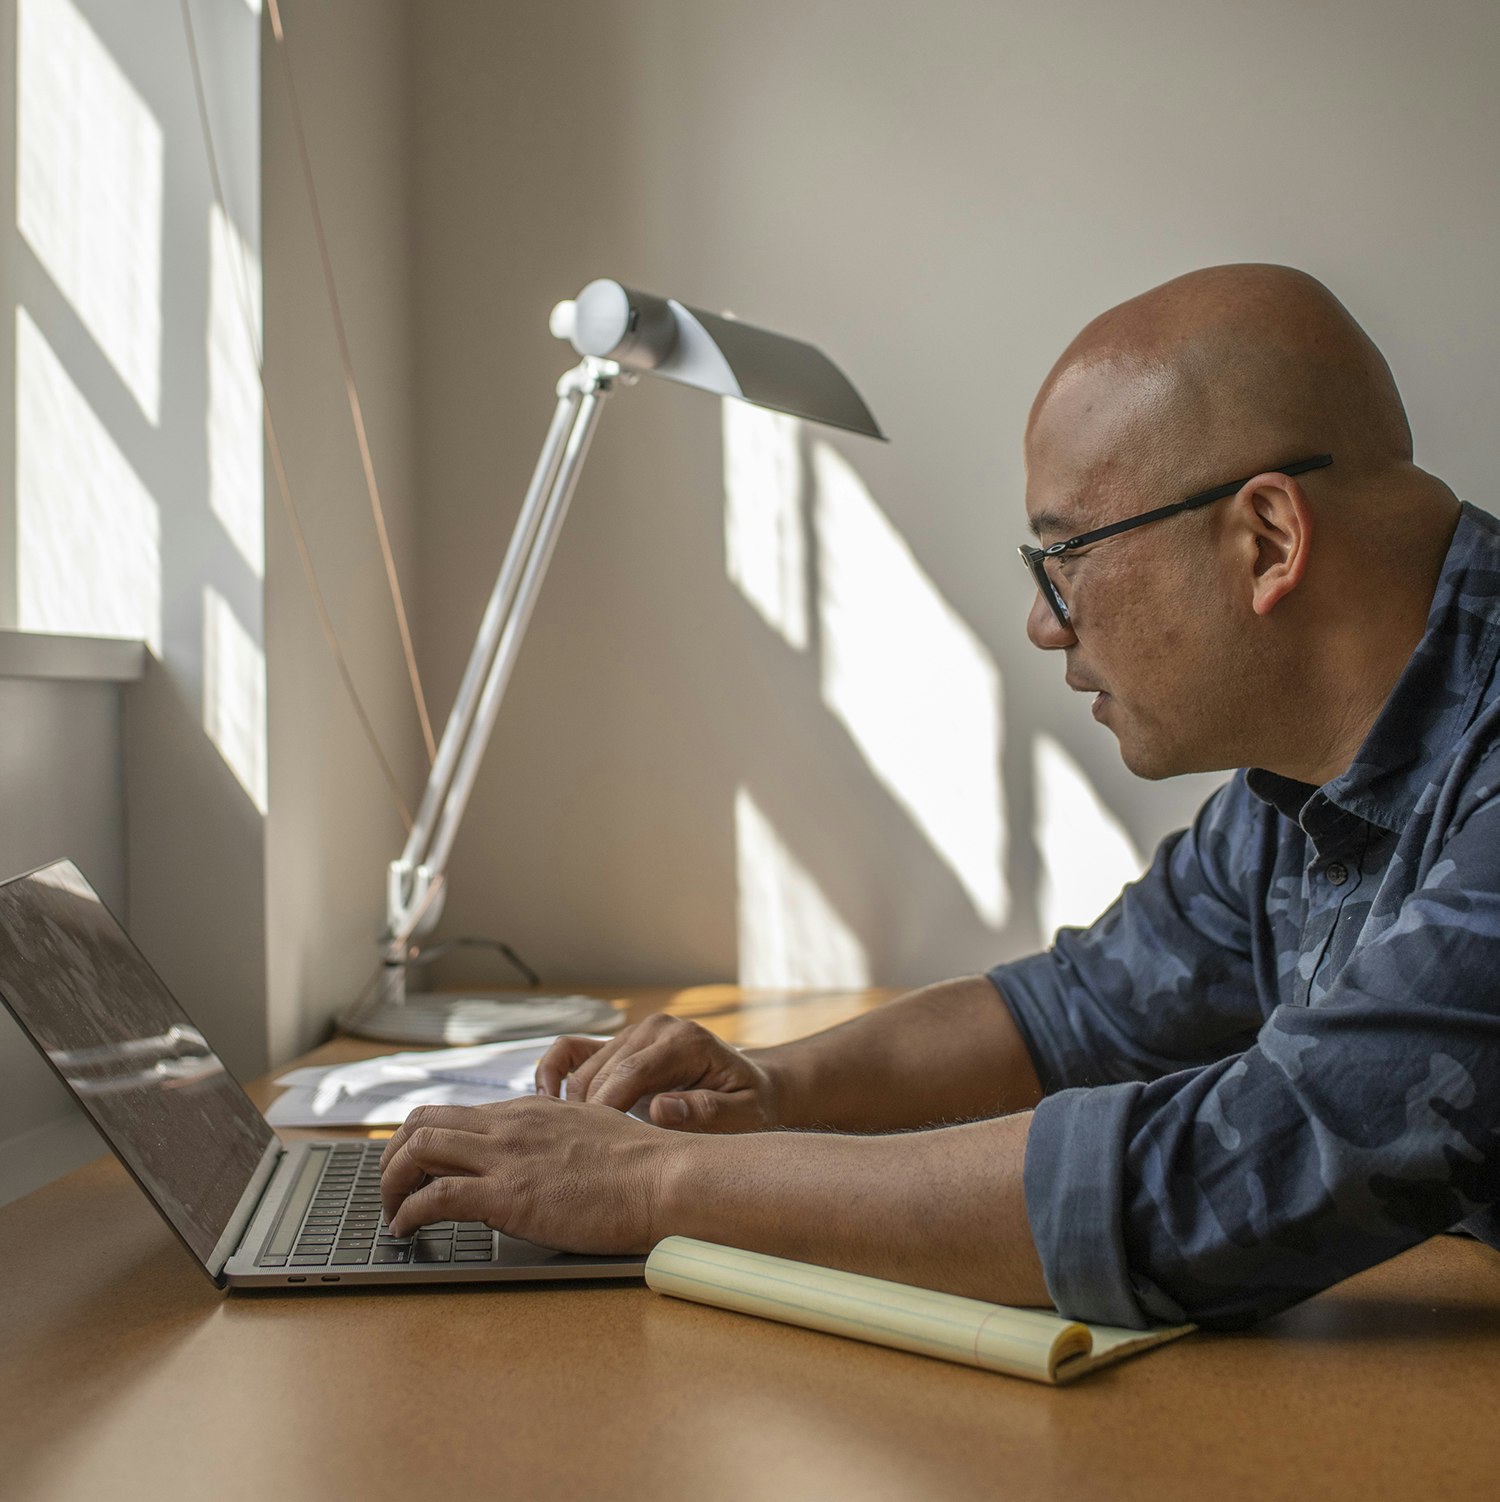 A man, in profile, types on a laptop as the sun streams in the window.